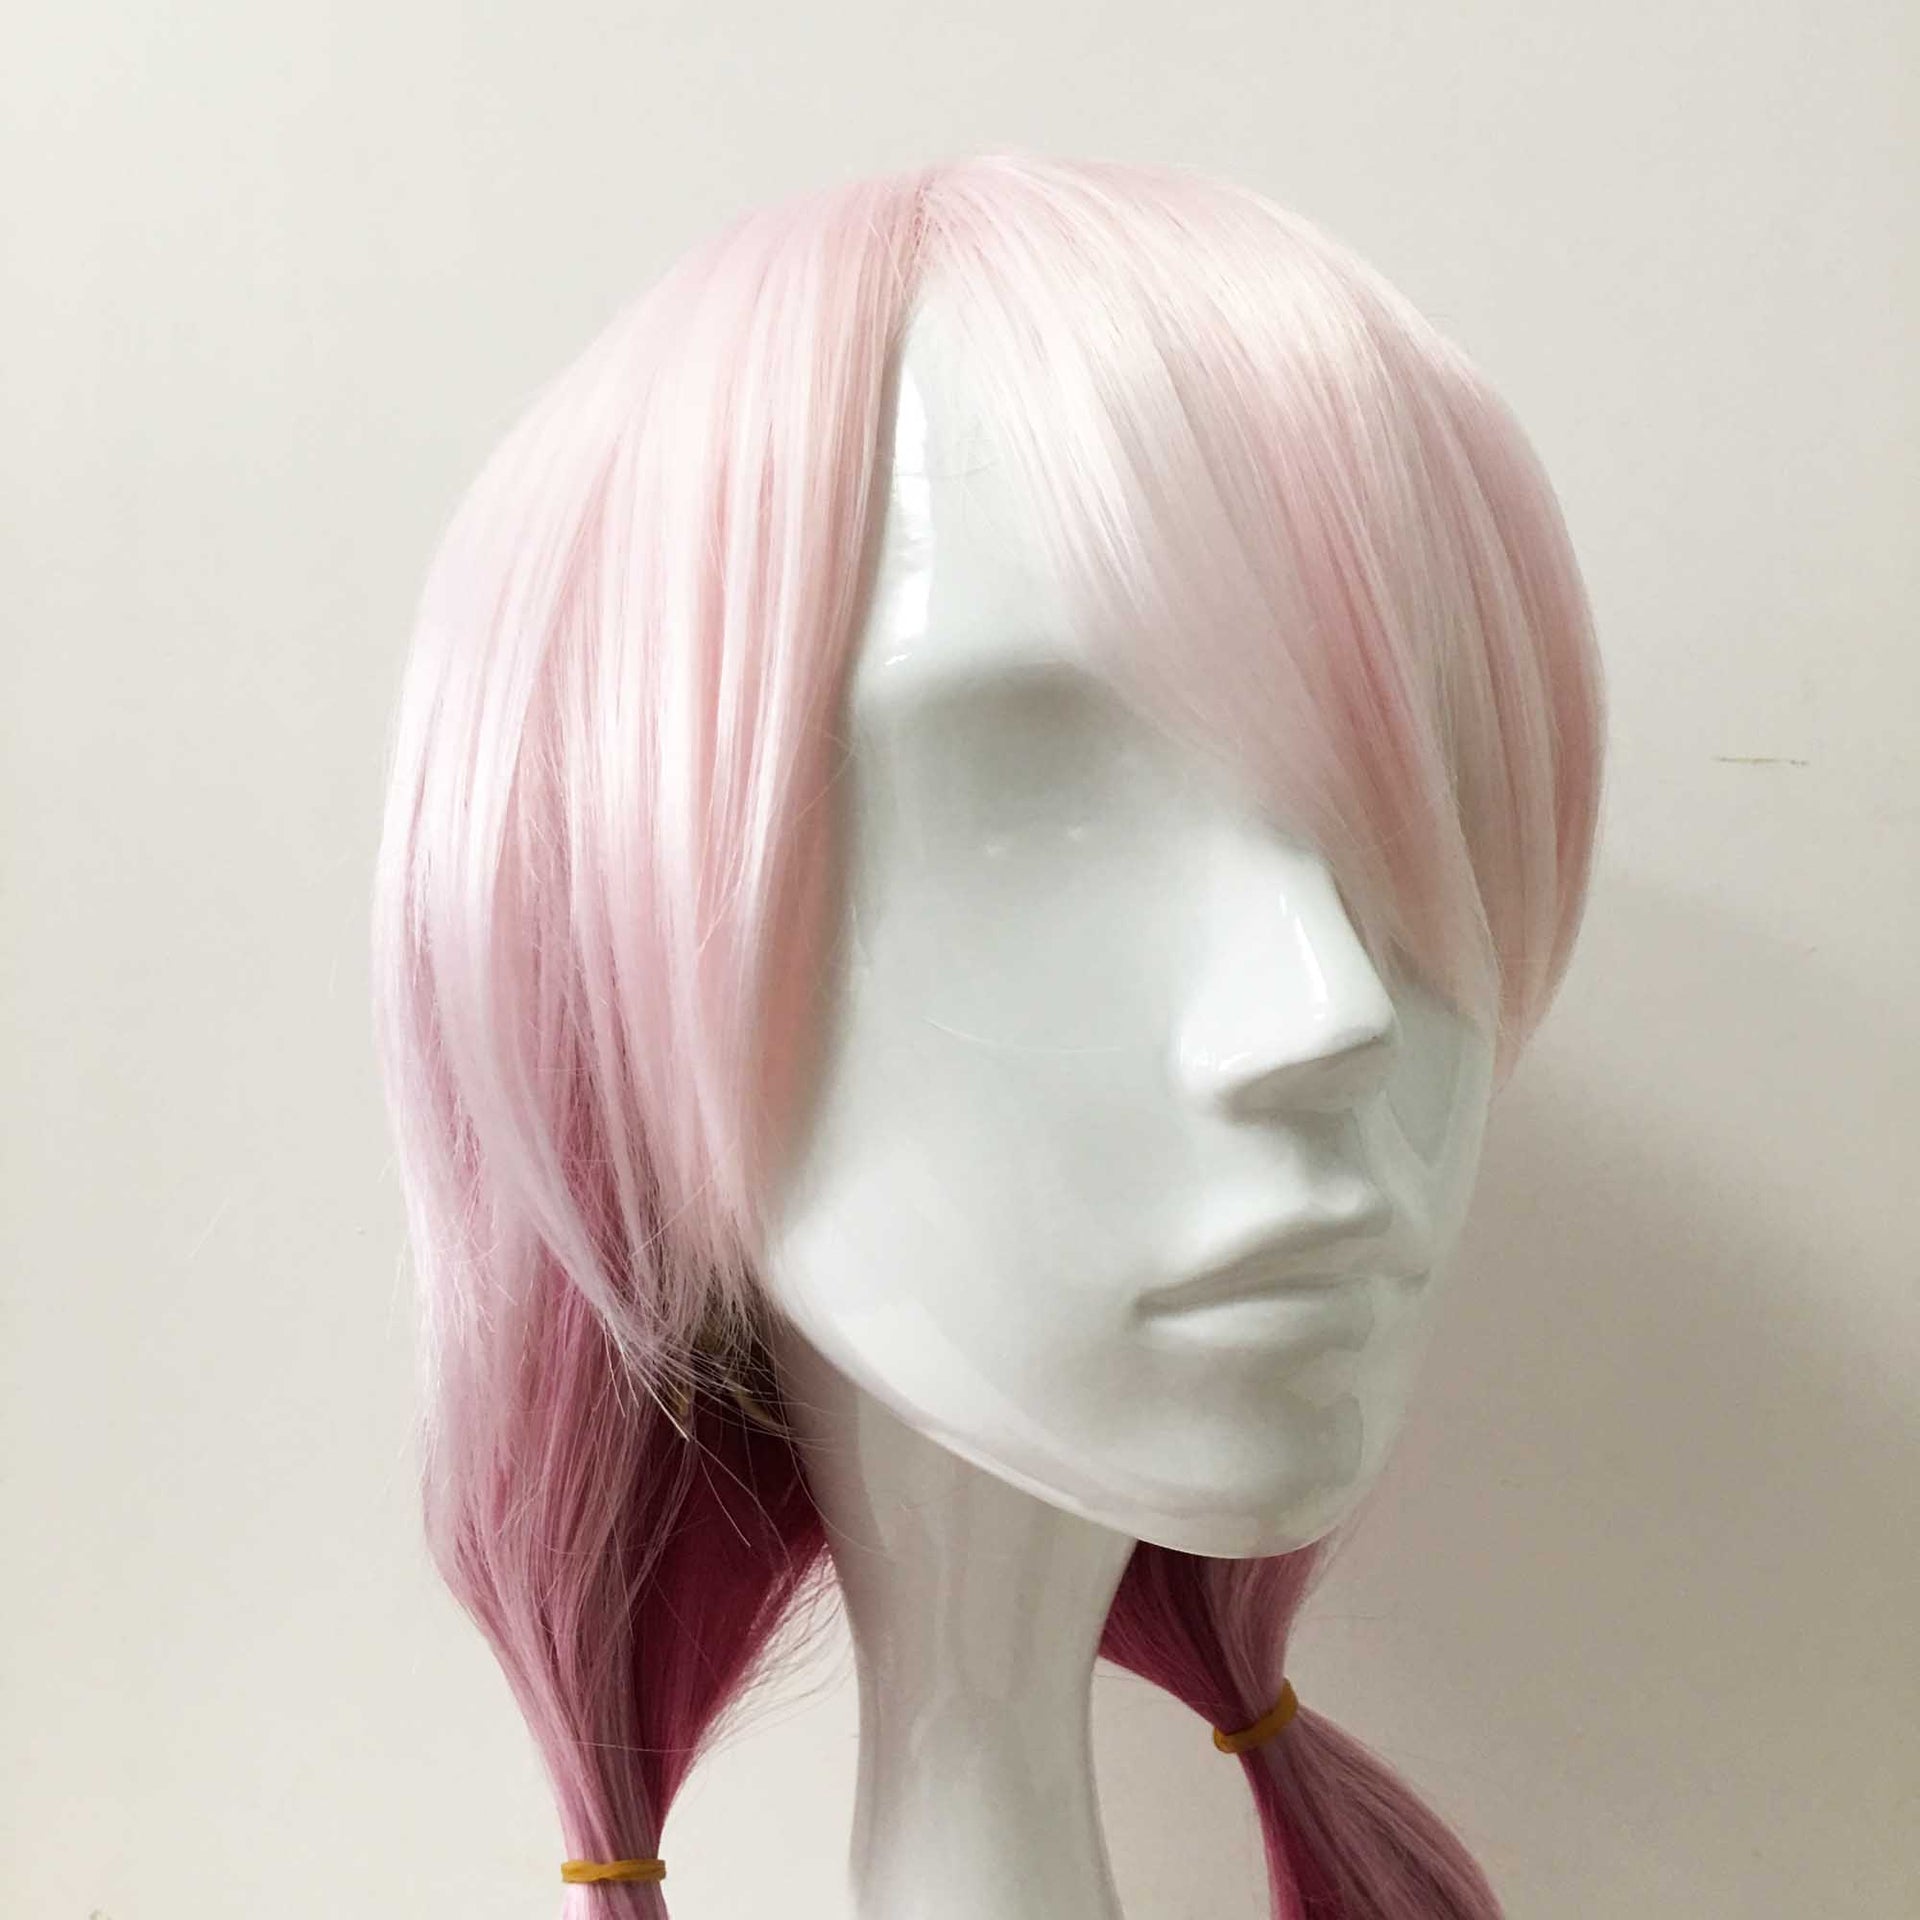 nevermindyrhead Women Pink Ombre Long Straight Ponytails Fringe Bangs Cosplay Wig